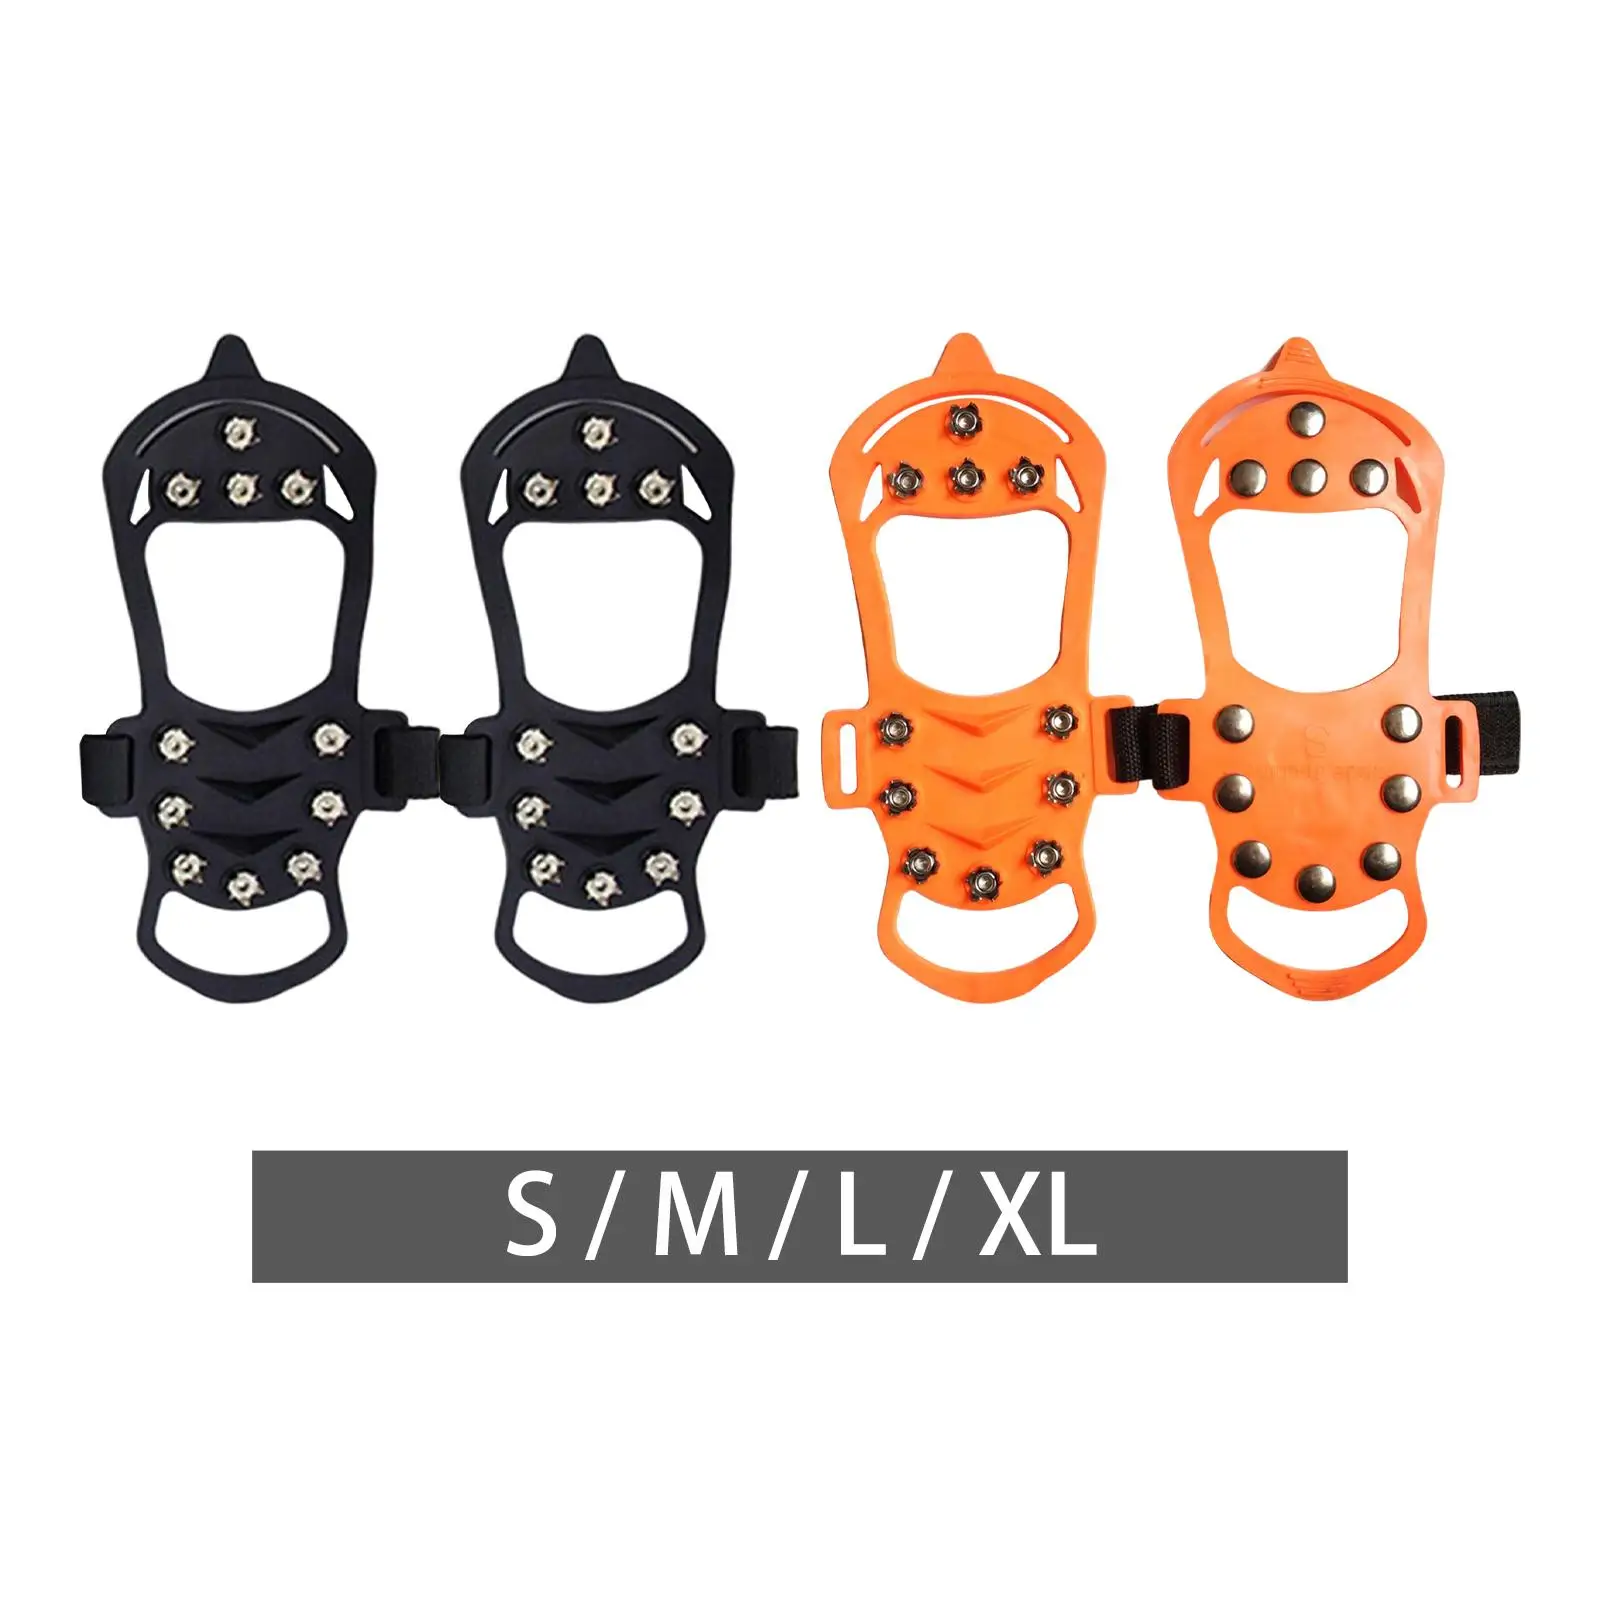 Non Slip 11 Spikes Crampons Shoe Cover Cleats for Snow Walking Winter Hiking